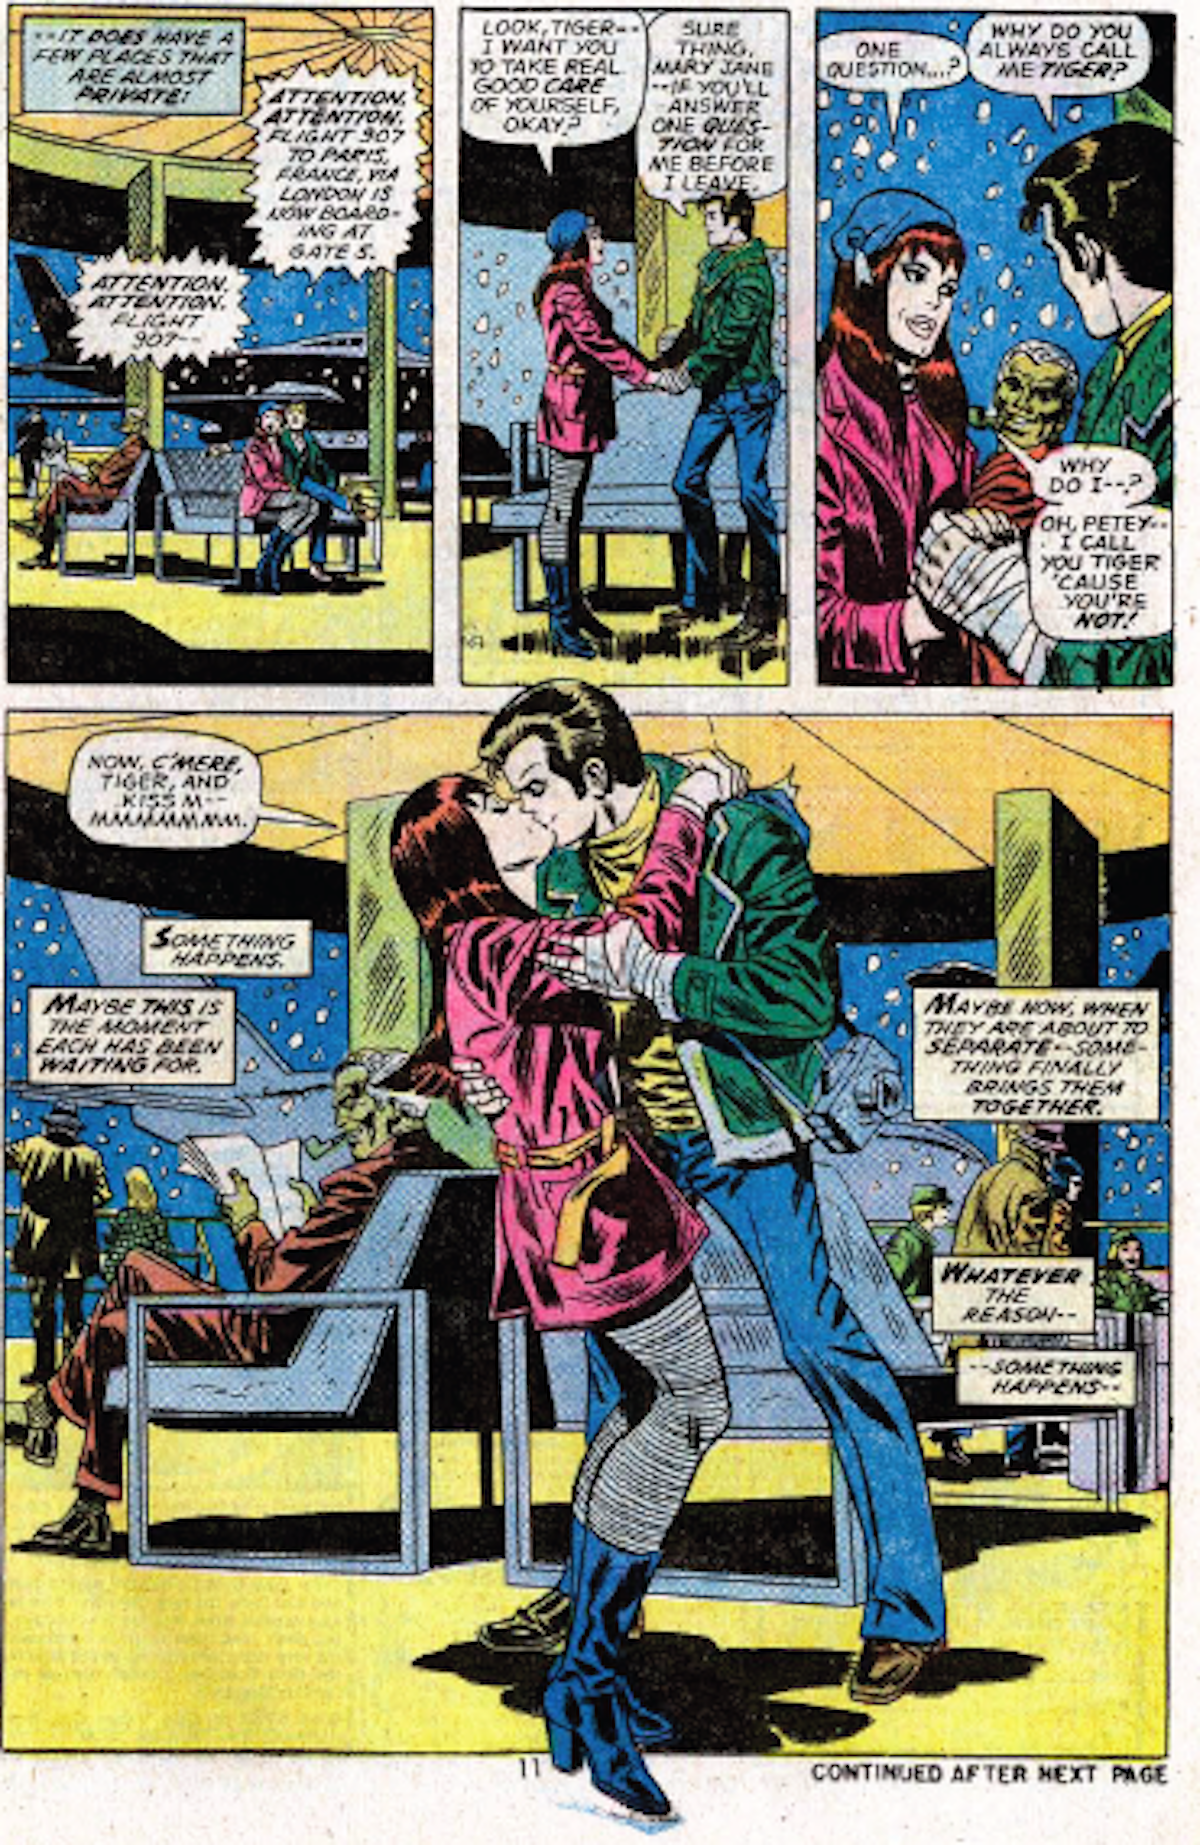 This comic strip was from Amazing Spider-Man #143 (1963), where Peter Parker and Mary Jane had their first kiss in an airport. 